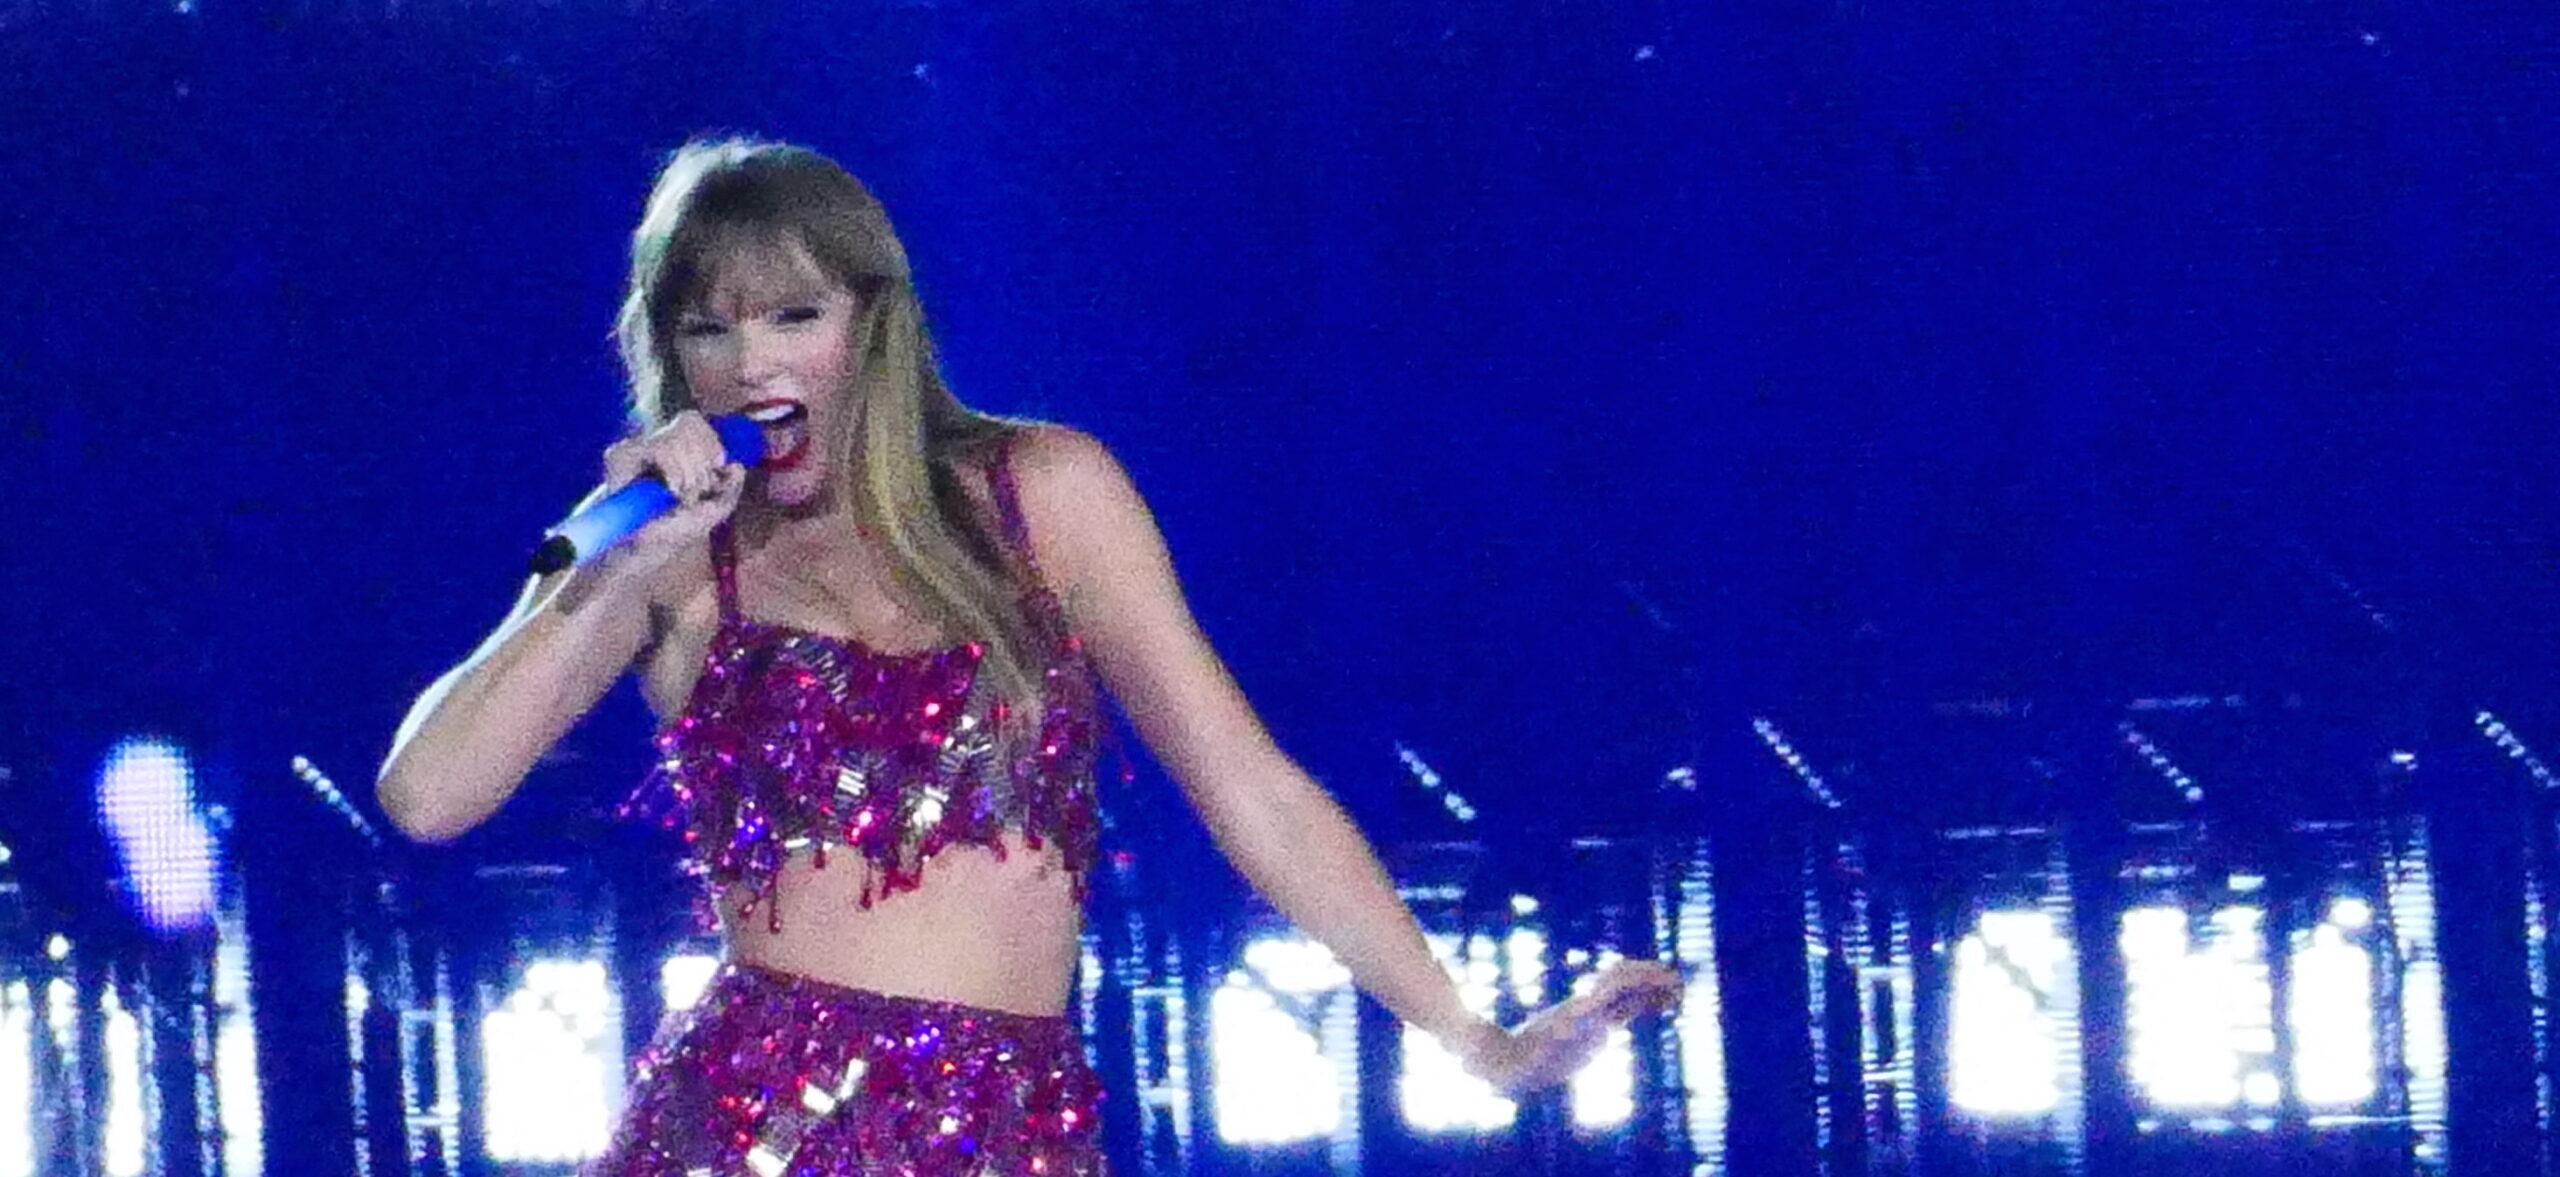 Taylor Swift holds a light saber style prop as bicycles and cars go by her in amazing visual show on stage during first weekend of her tour in Arizona